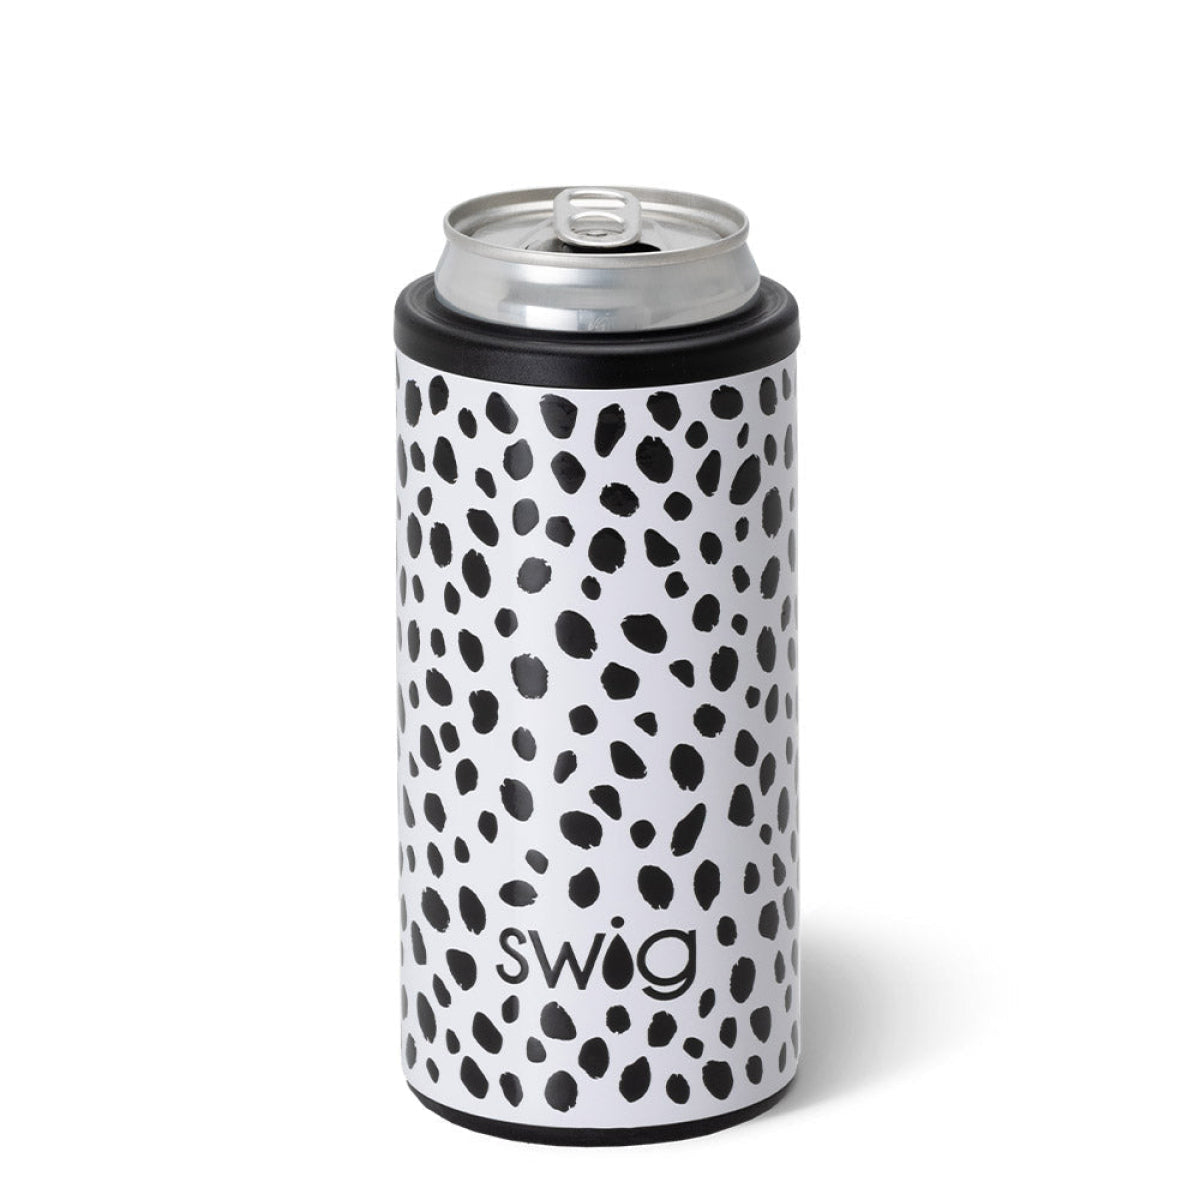 12 Oz. Swig Life Can Cooler - 55438